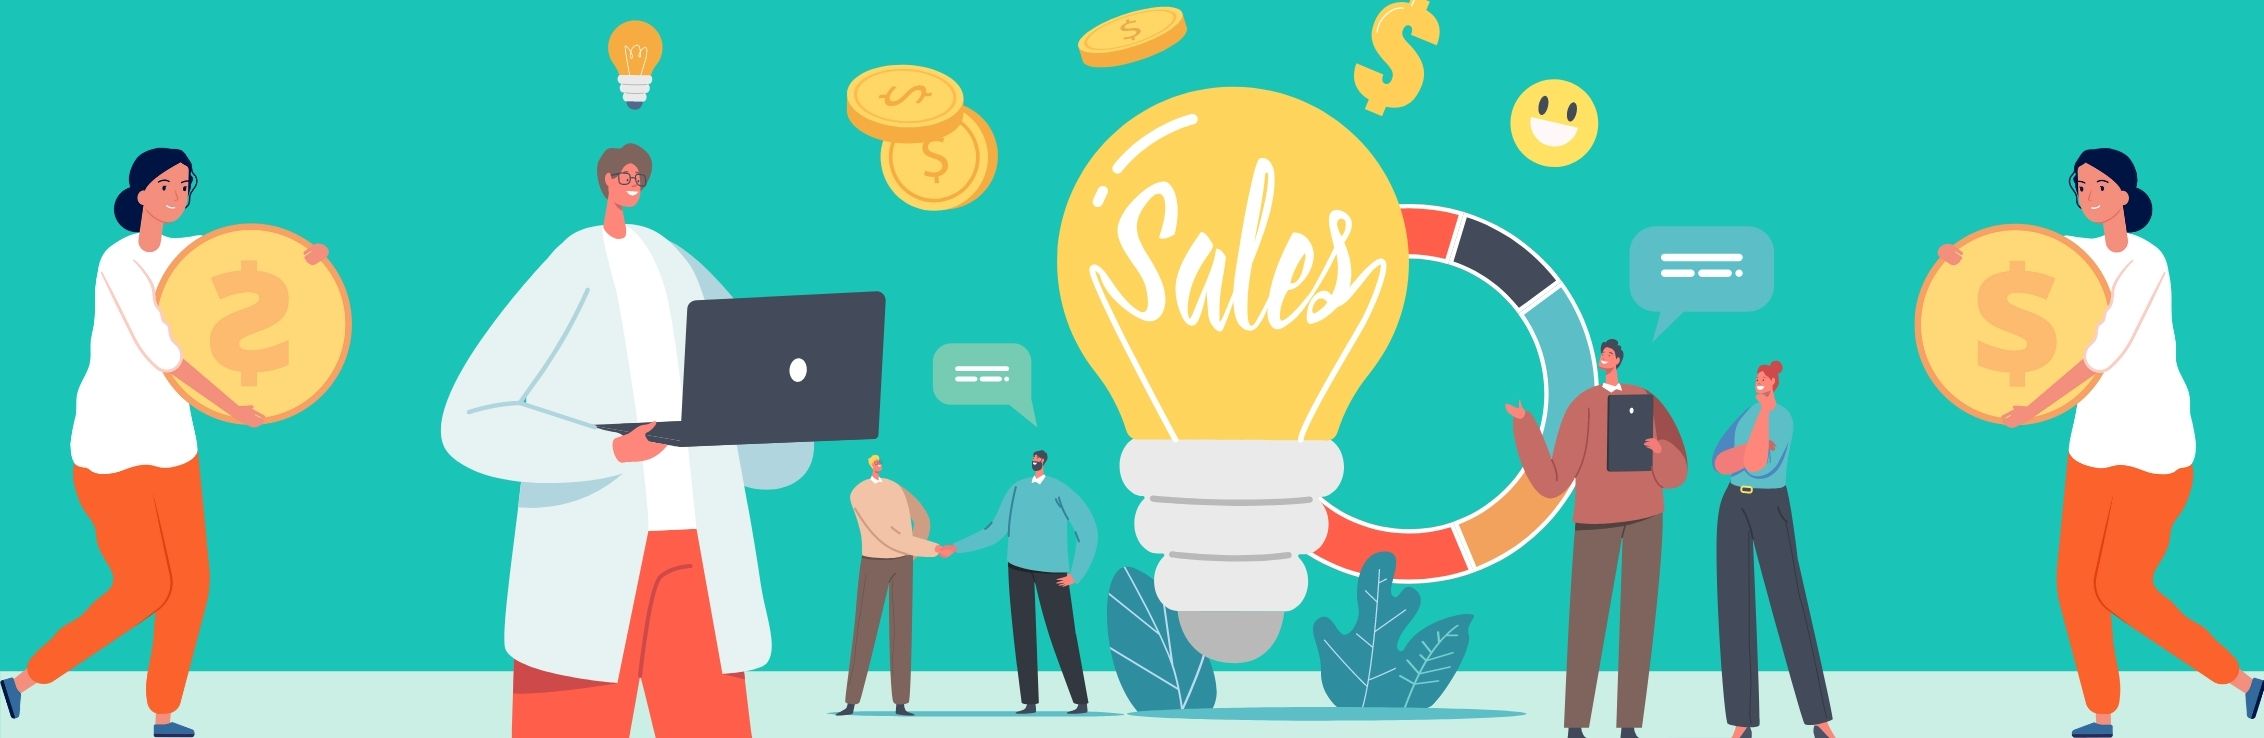 Sales Is a Five Letter Word You Need to Learn